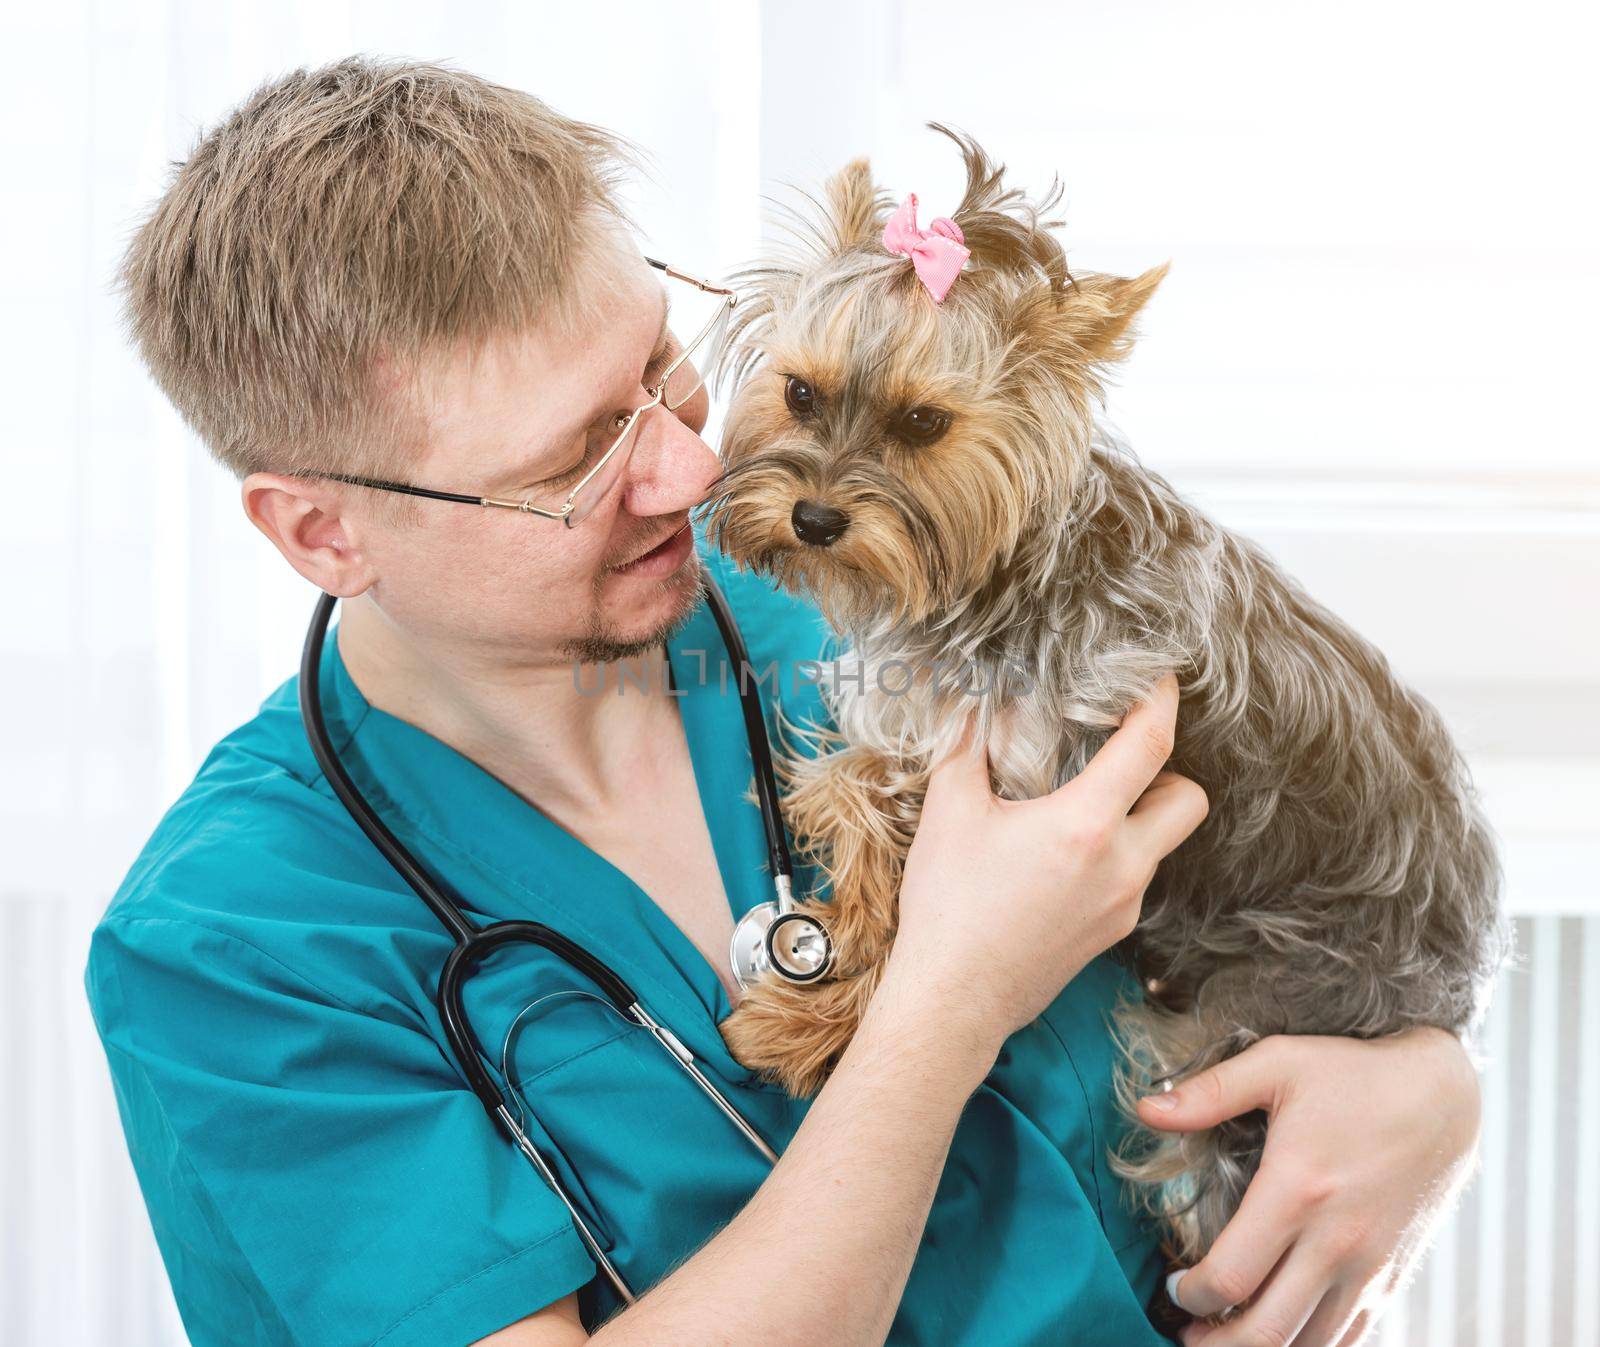 Veterinarian doctor holding Yorkshire Terrier dog on hands at vet clinic. Pet care concept